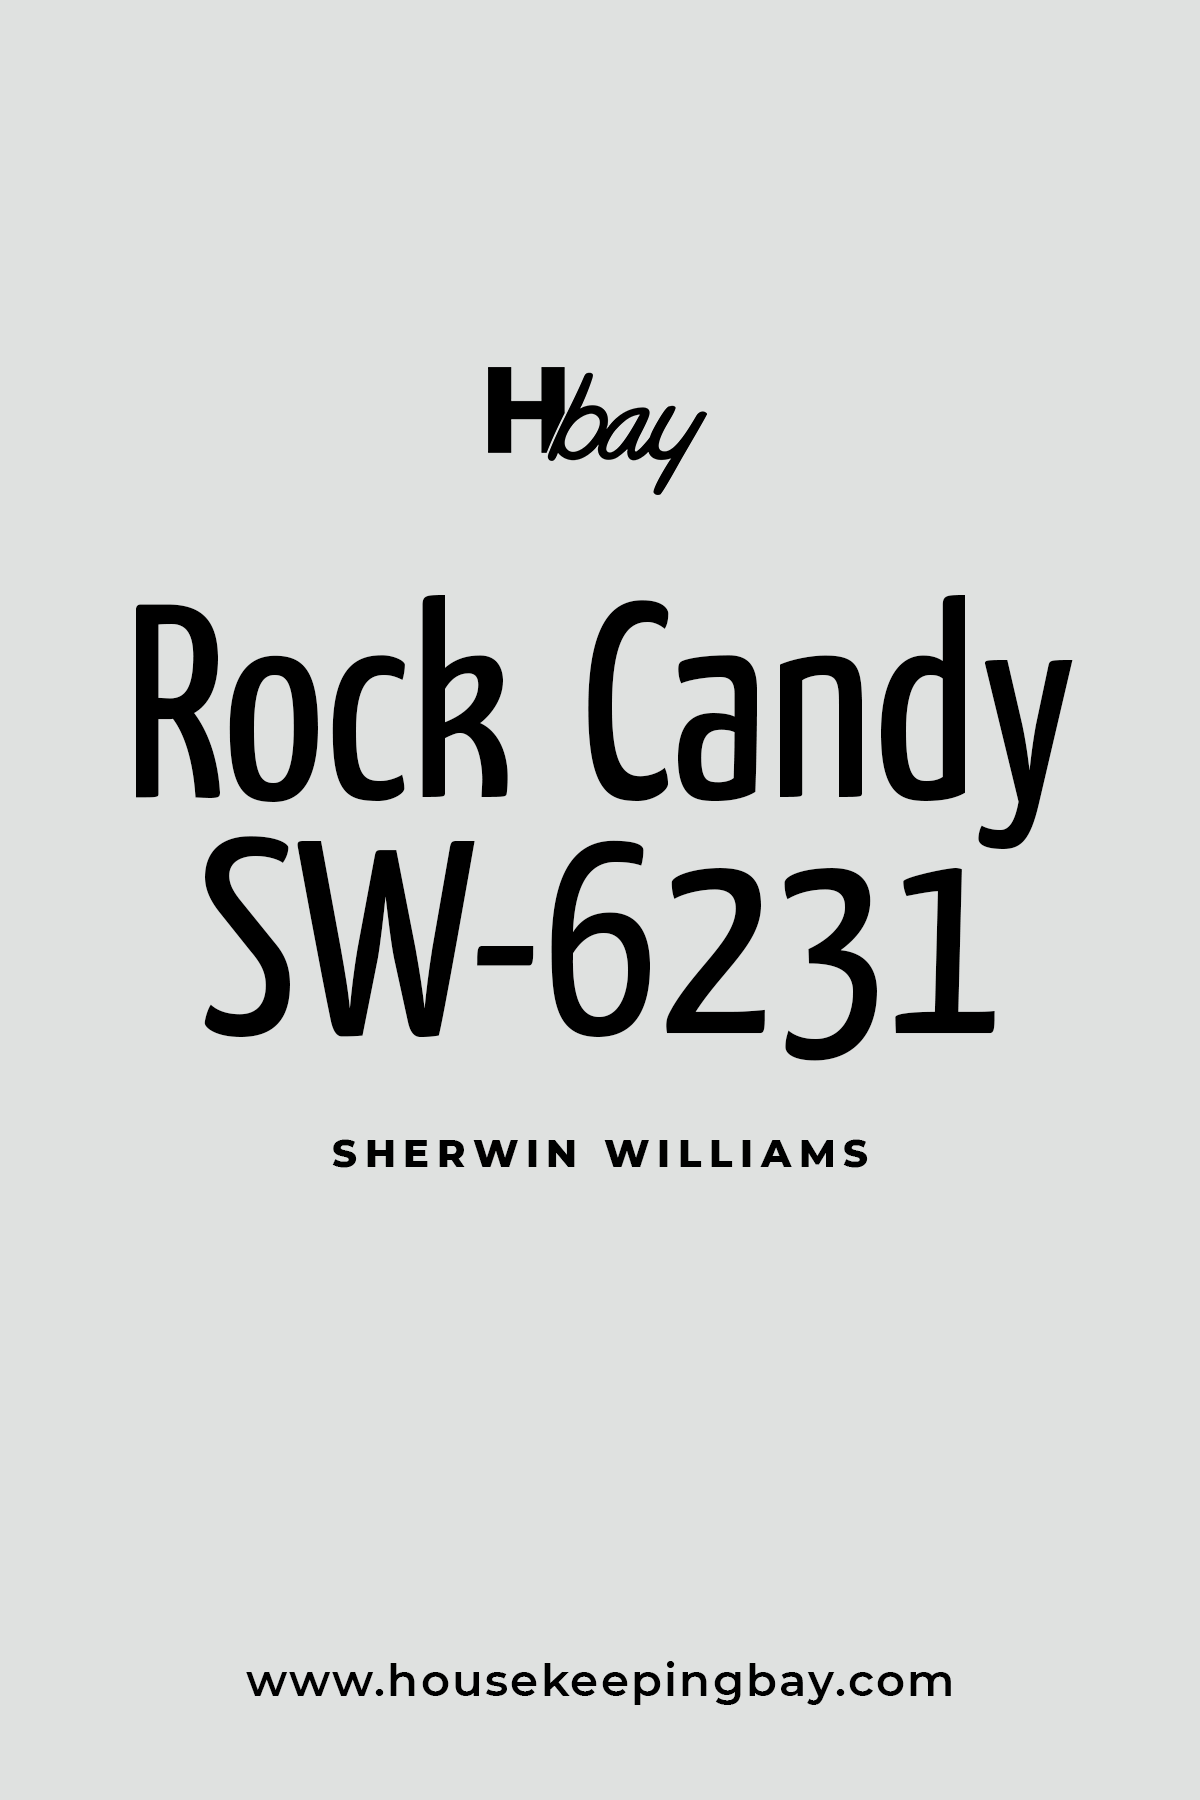 Rock Candy SW 6231 By Sherwin Williams (1)